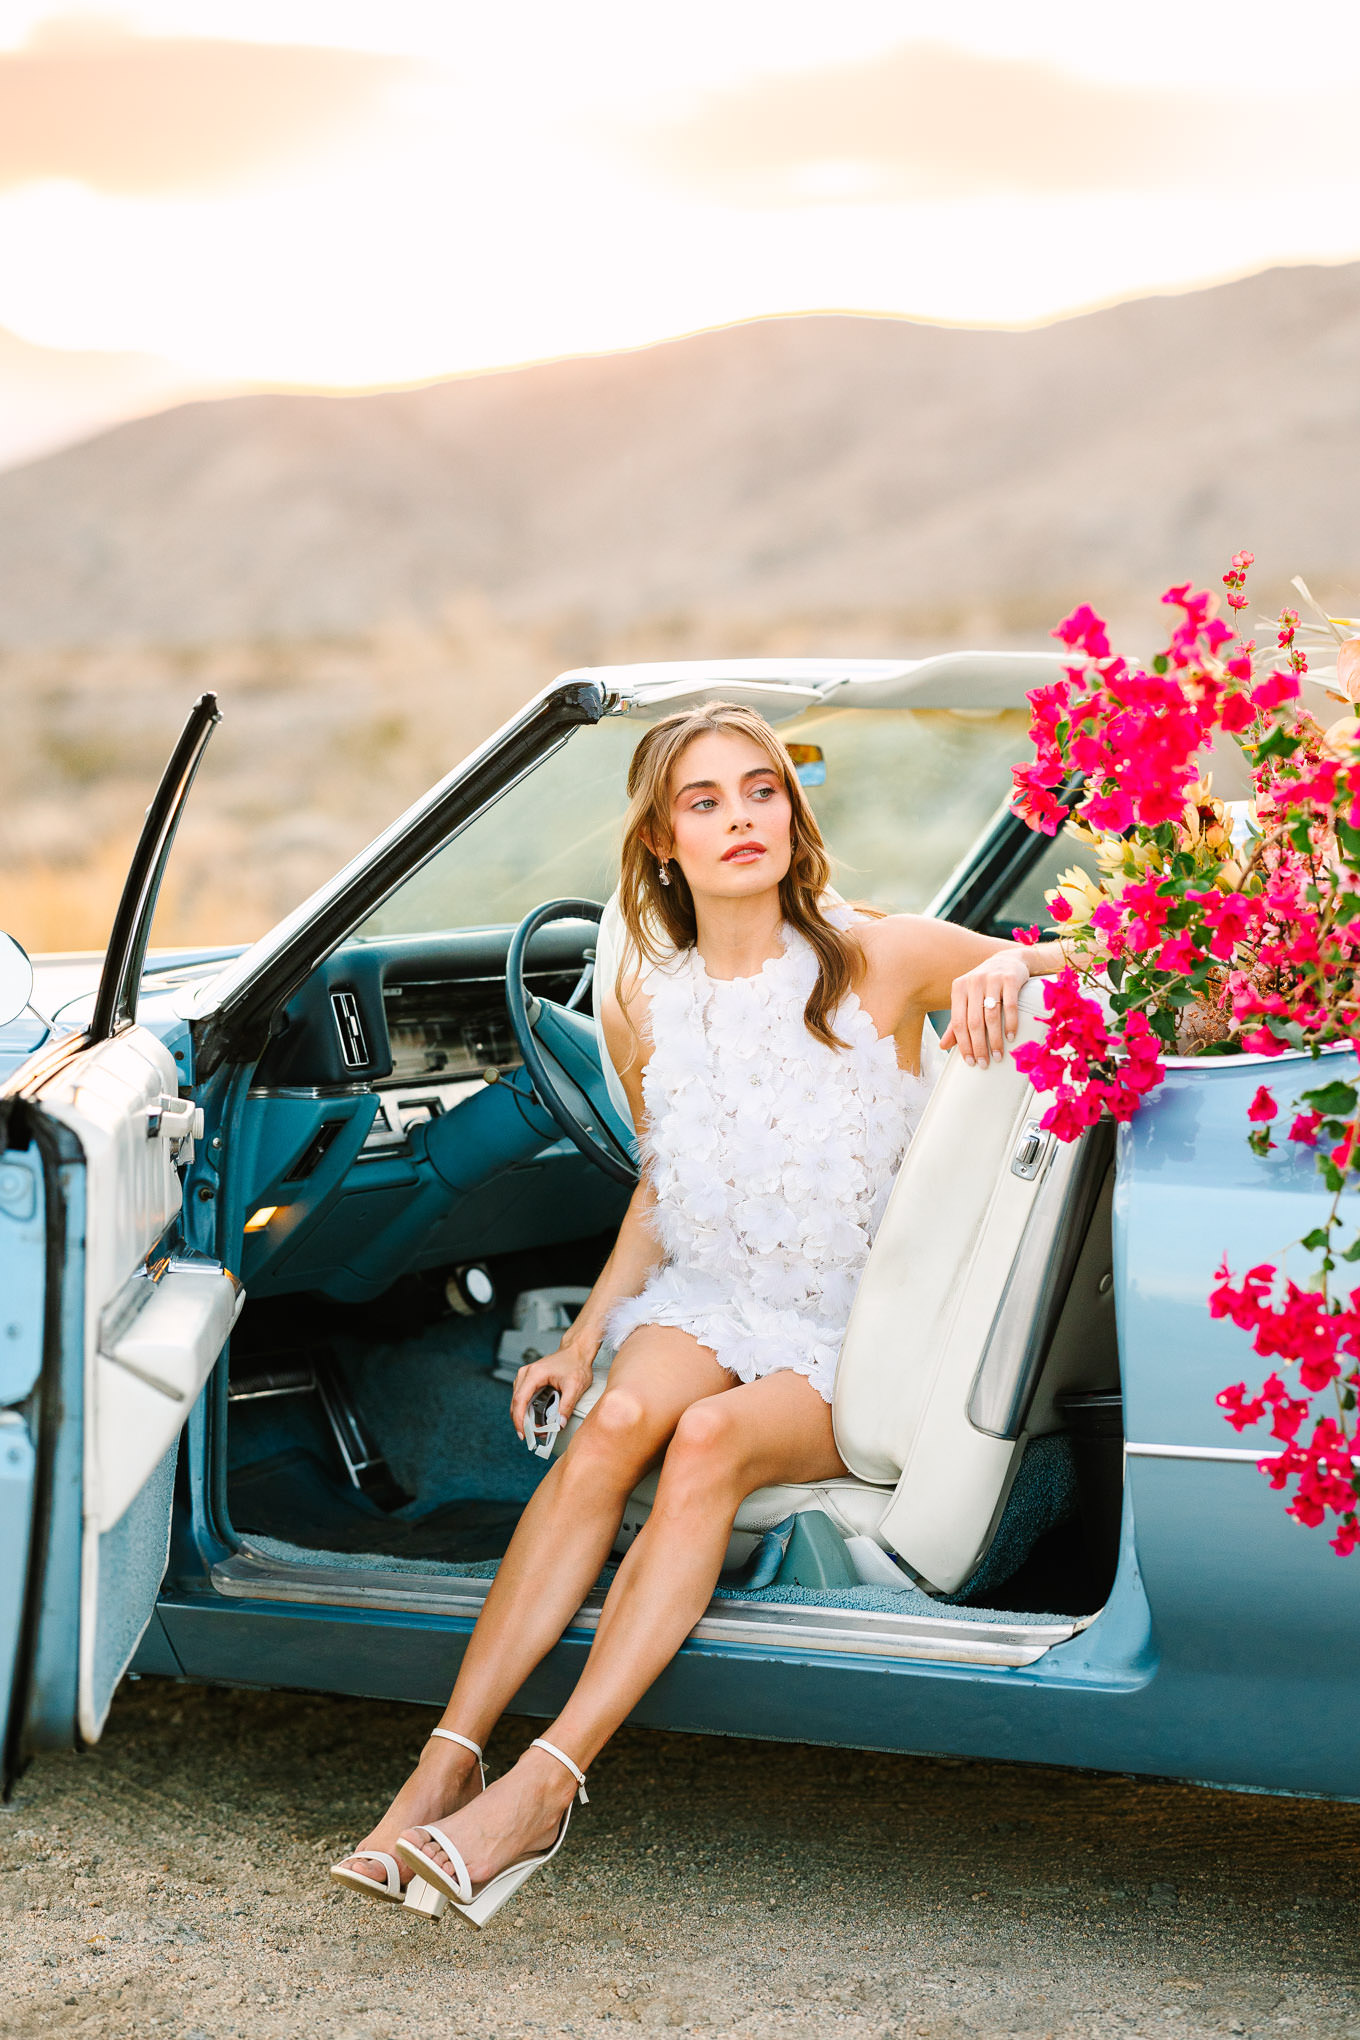 Kindred Presets x Mary Costa ad campaign photo shoot | Wedding and elopement photography roundup | Los Angeles and Palm Springs photographer | #losangeleswedding #palmspringswedding #elopementphotographer Source: Mary Costa Photography | Los Angeles